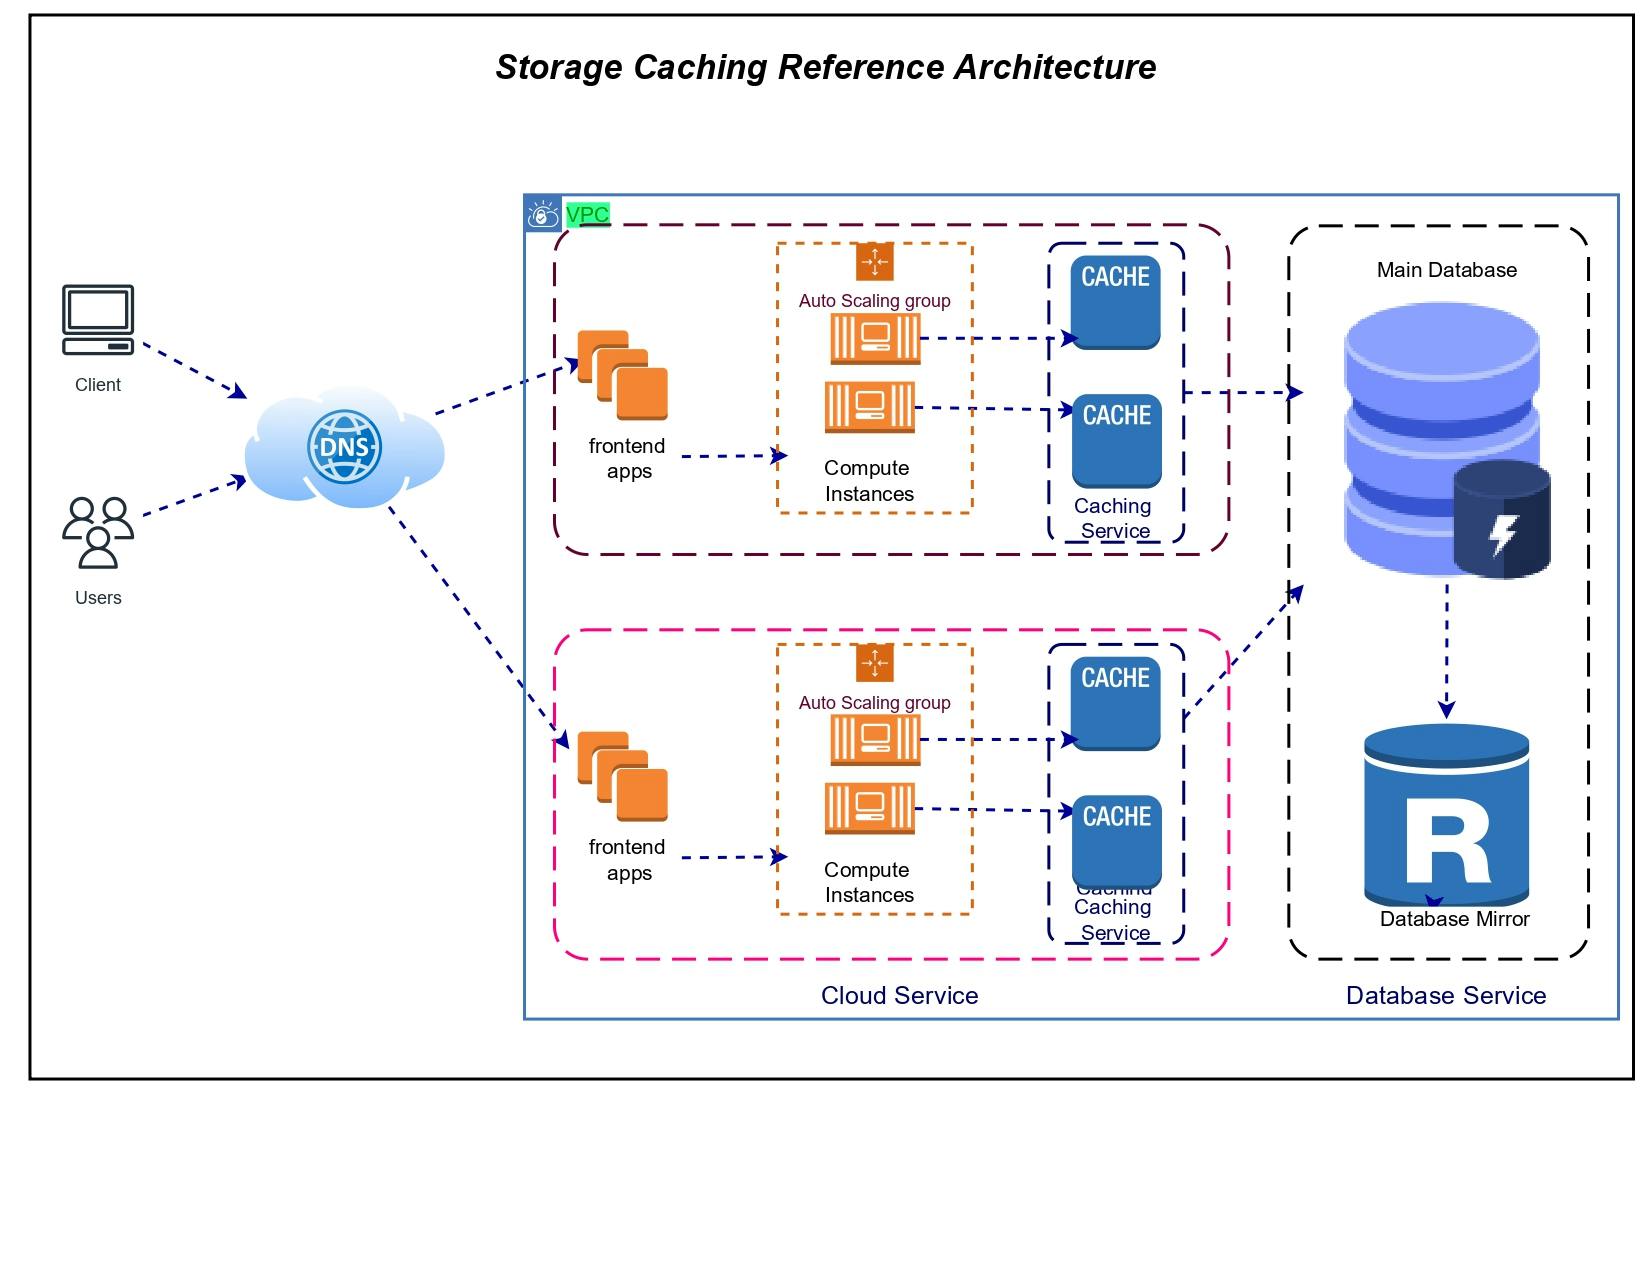 Storage Caching Reference Architecture_upi cloud9prime blog.jpg